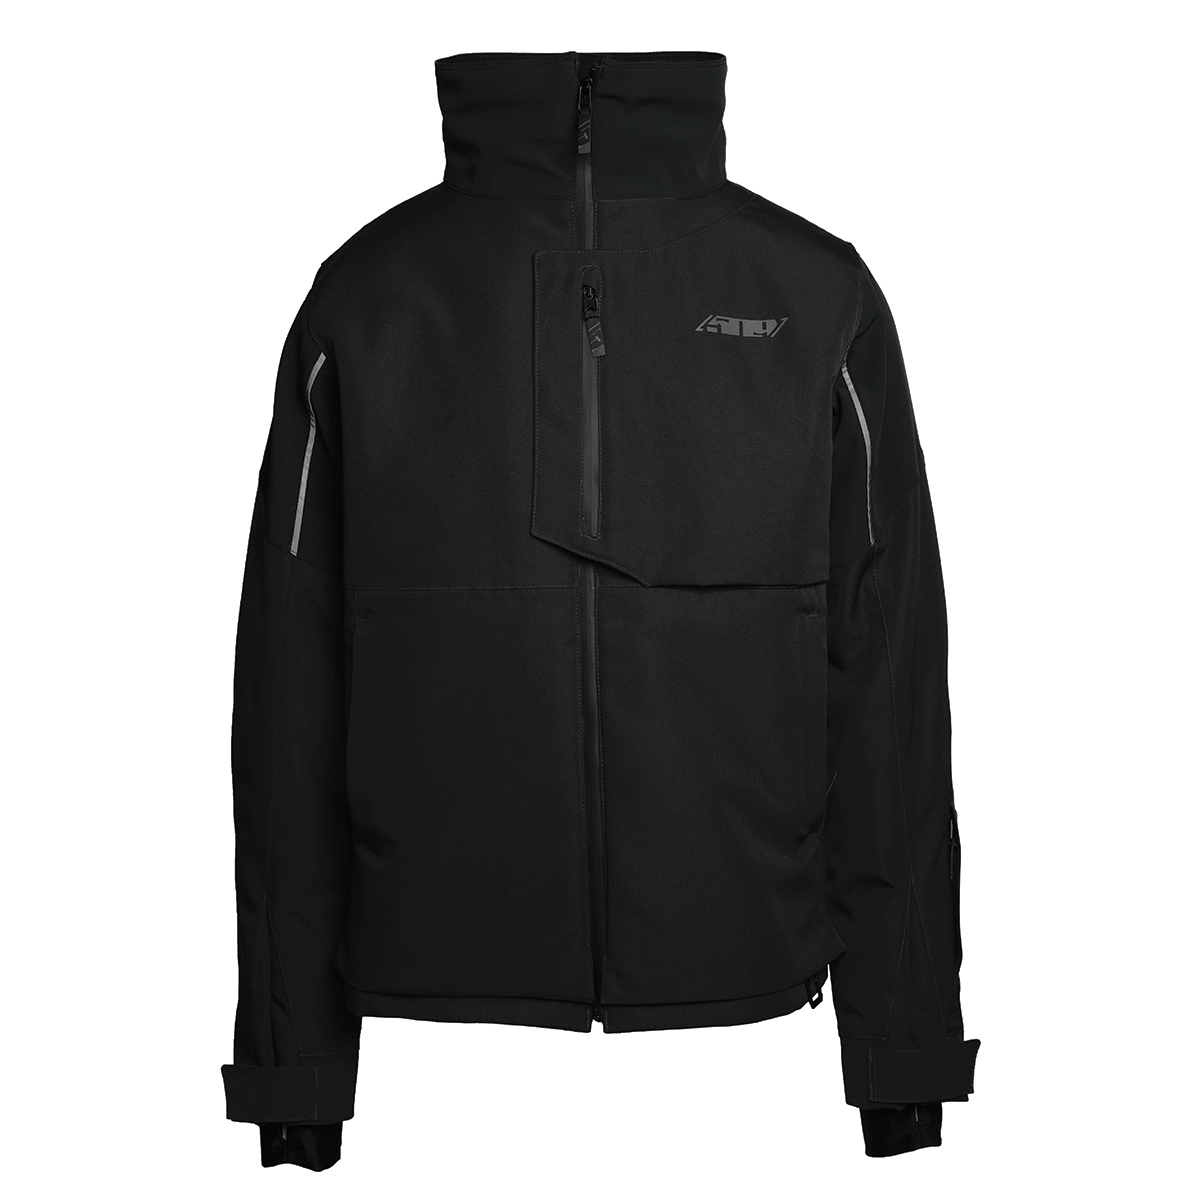 509 insulated jackets for men powerline